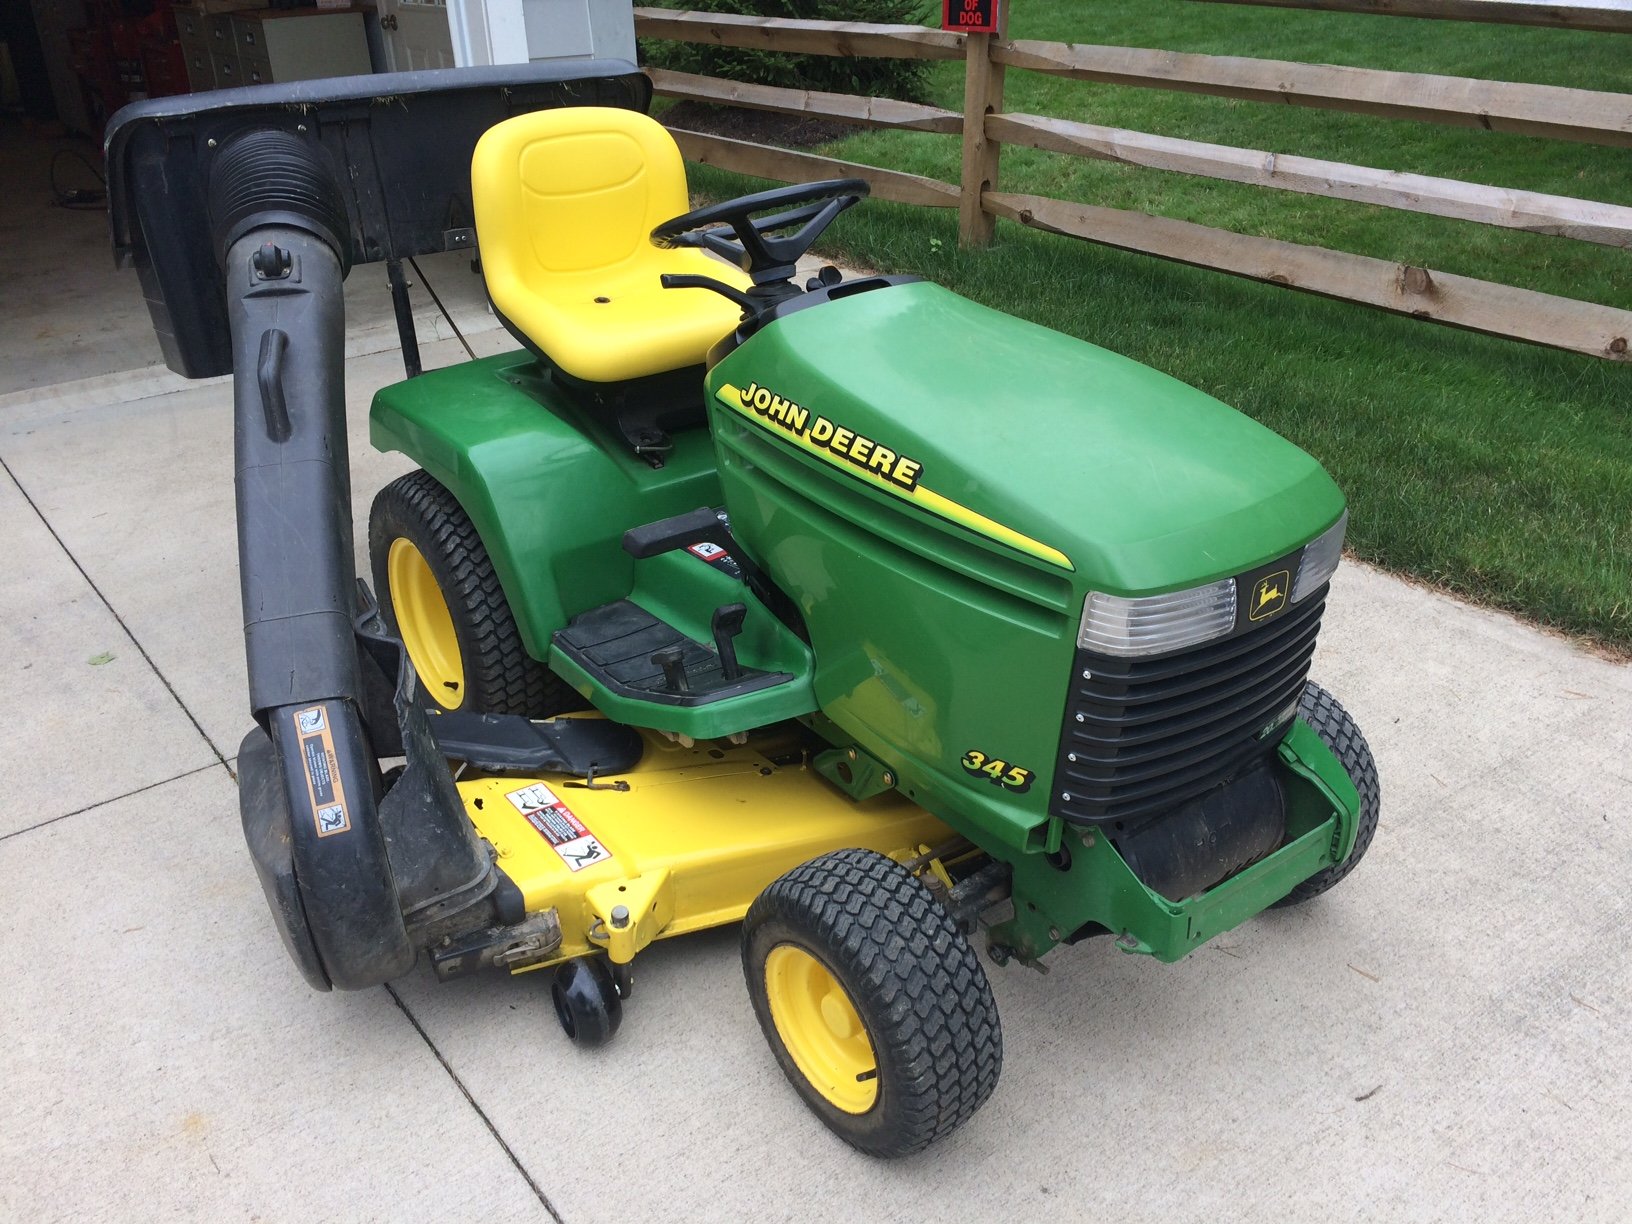 john-deere-345-specs-price-review-category-models-list-prices